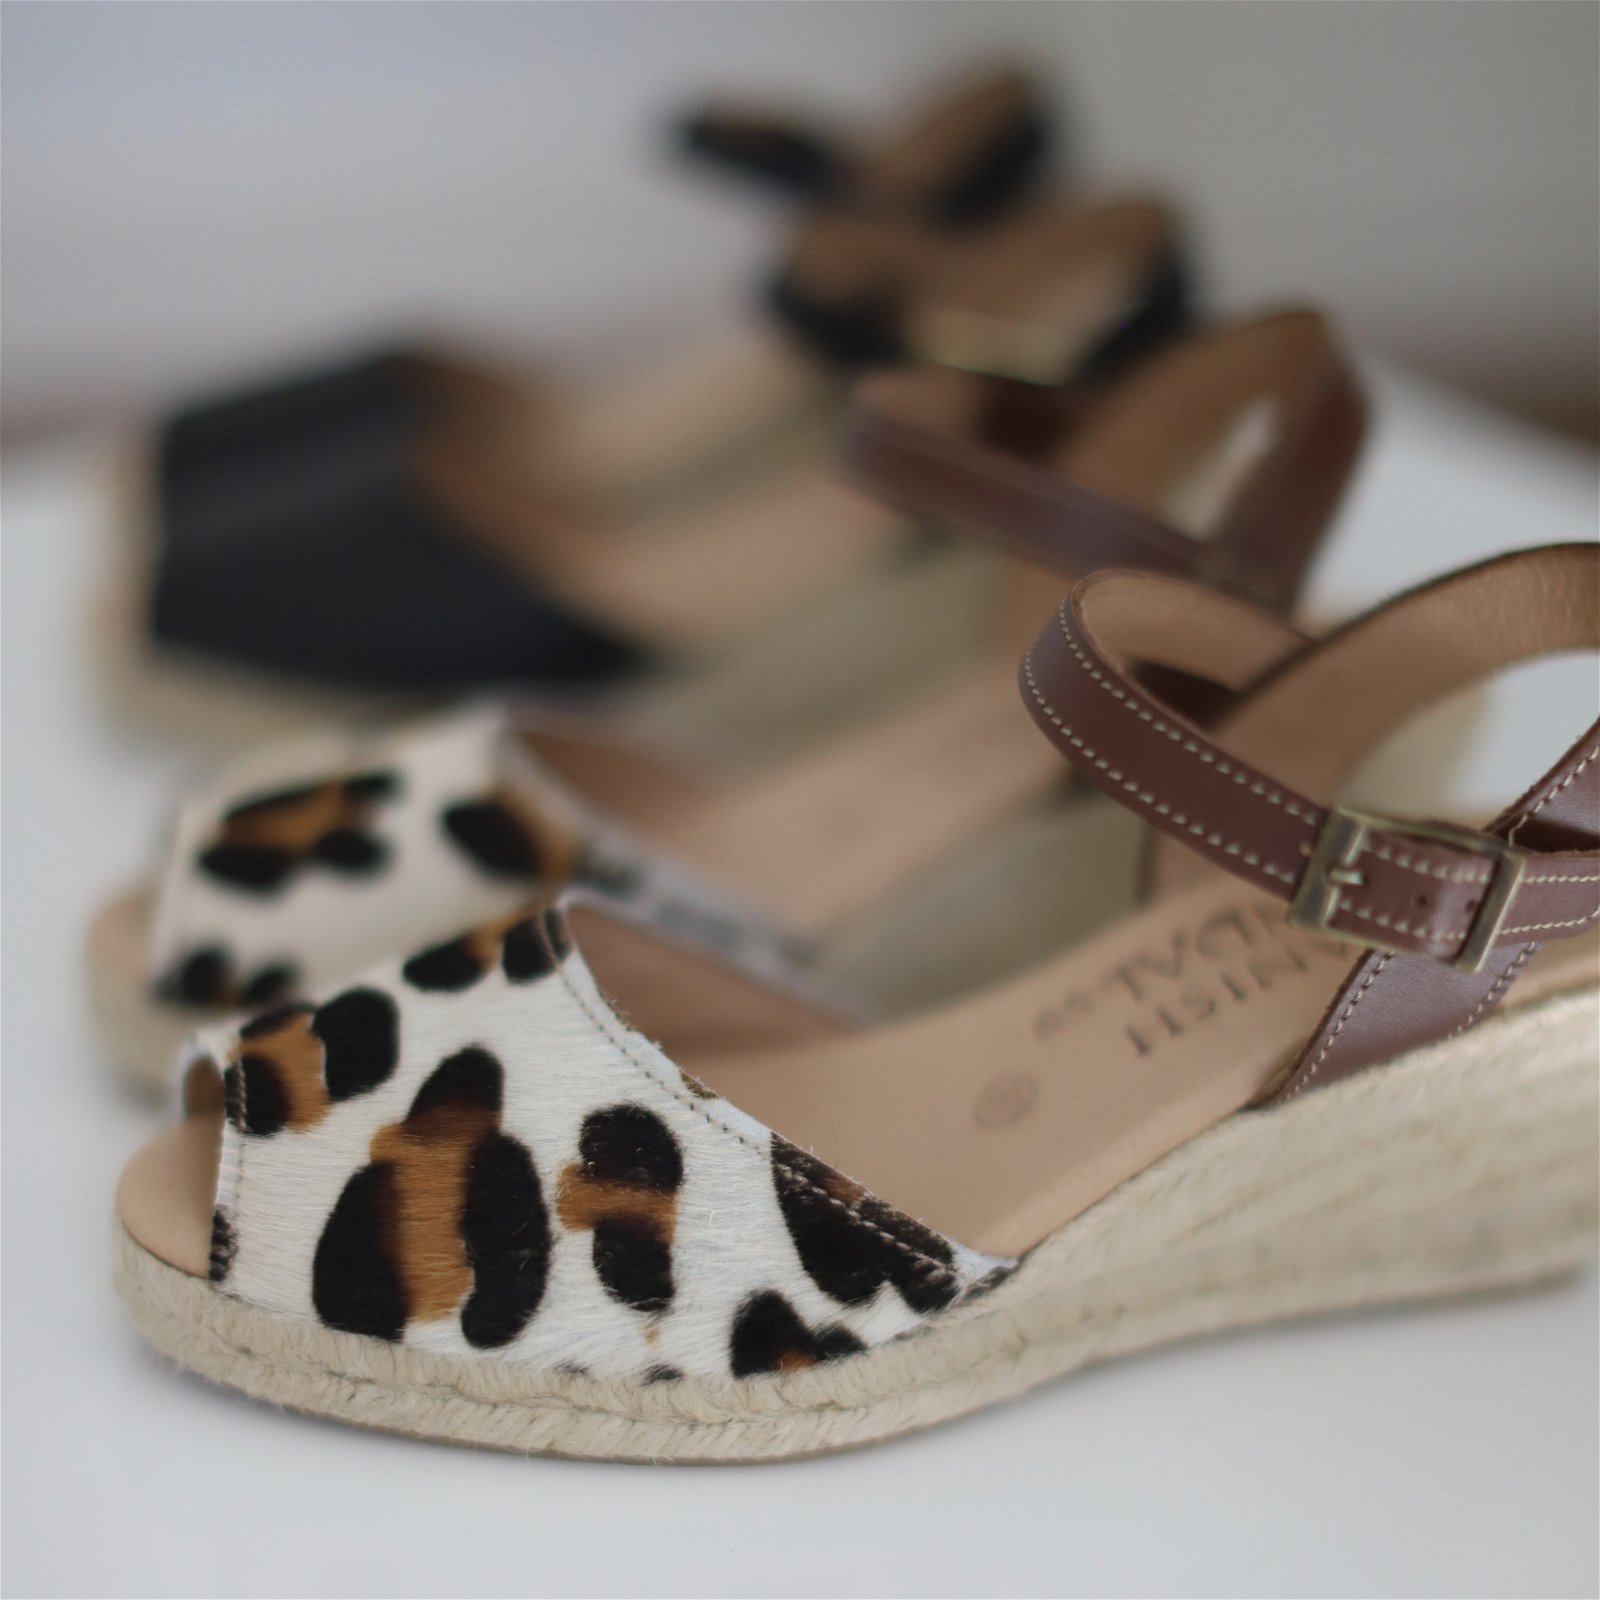 Discover our Spanish Sandals | Milled